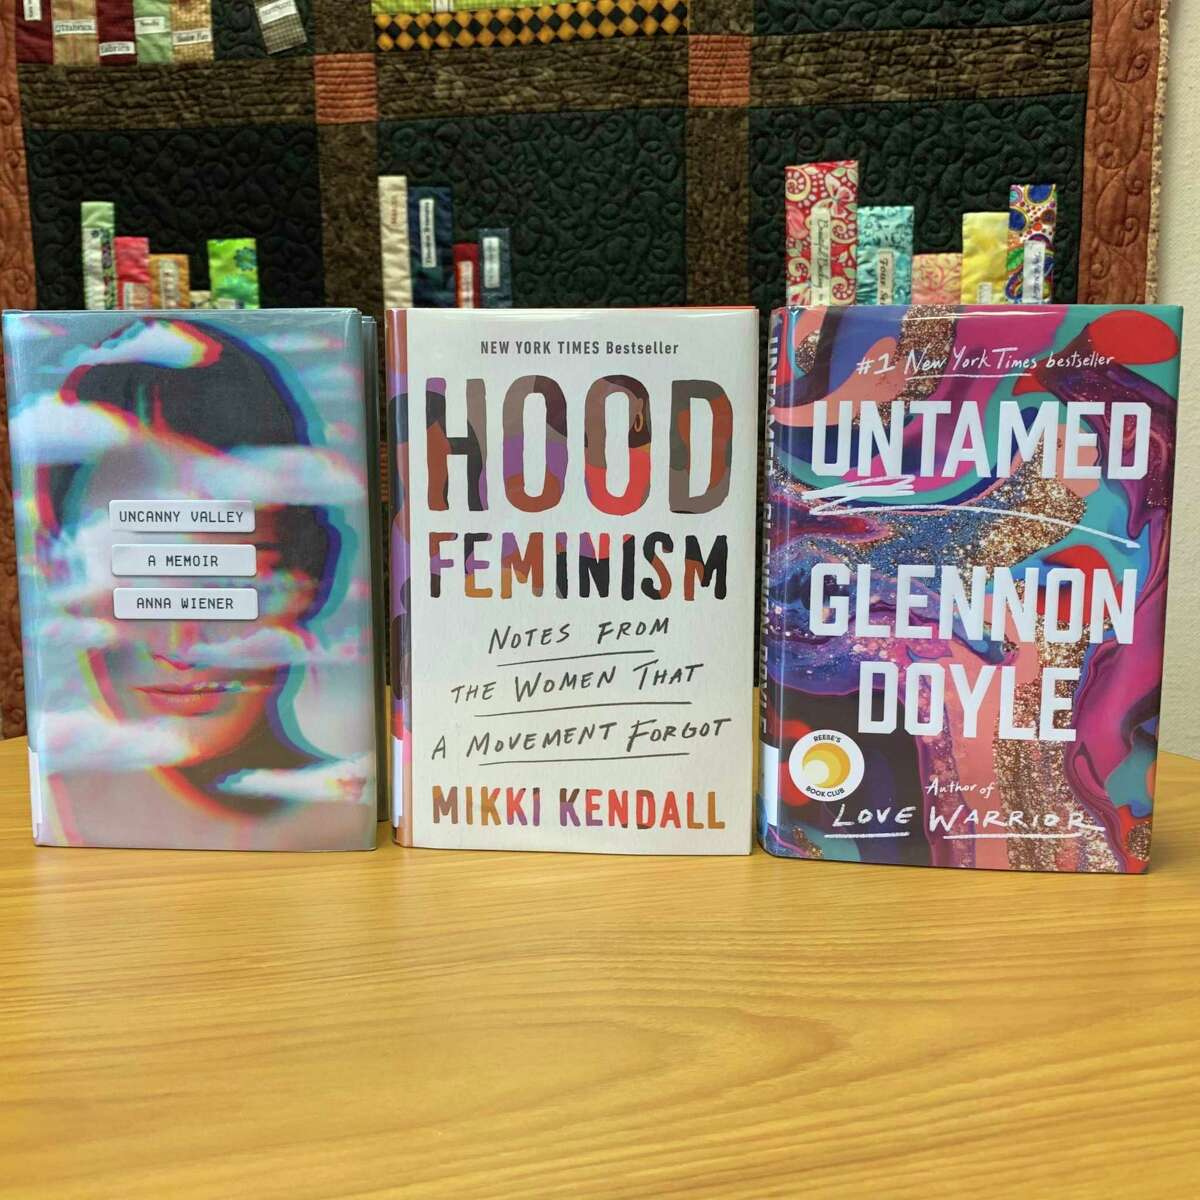 "Hood Feminism: Notes from the Women That a Movement Forgot" by Mikki Kendall shines a light on the 'other' feminist issues such as living wages, quality education and hunger in an essay format. (Courtesy photo)